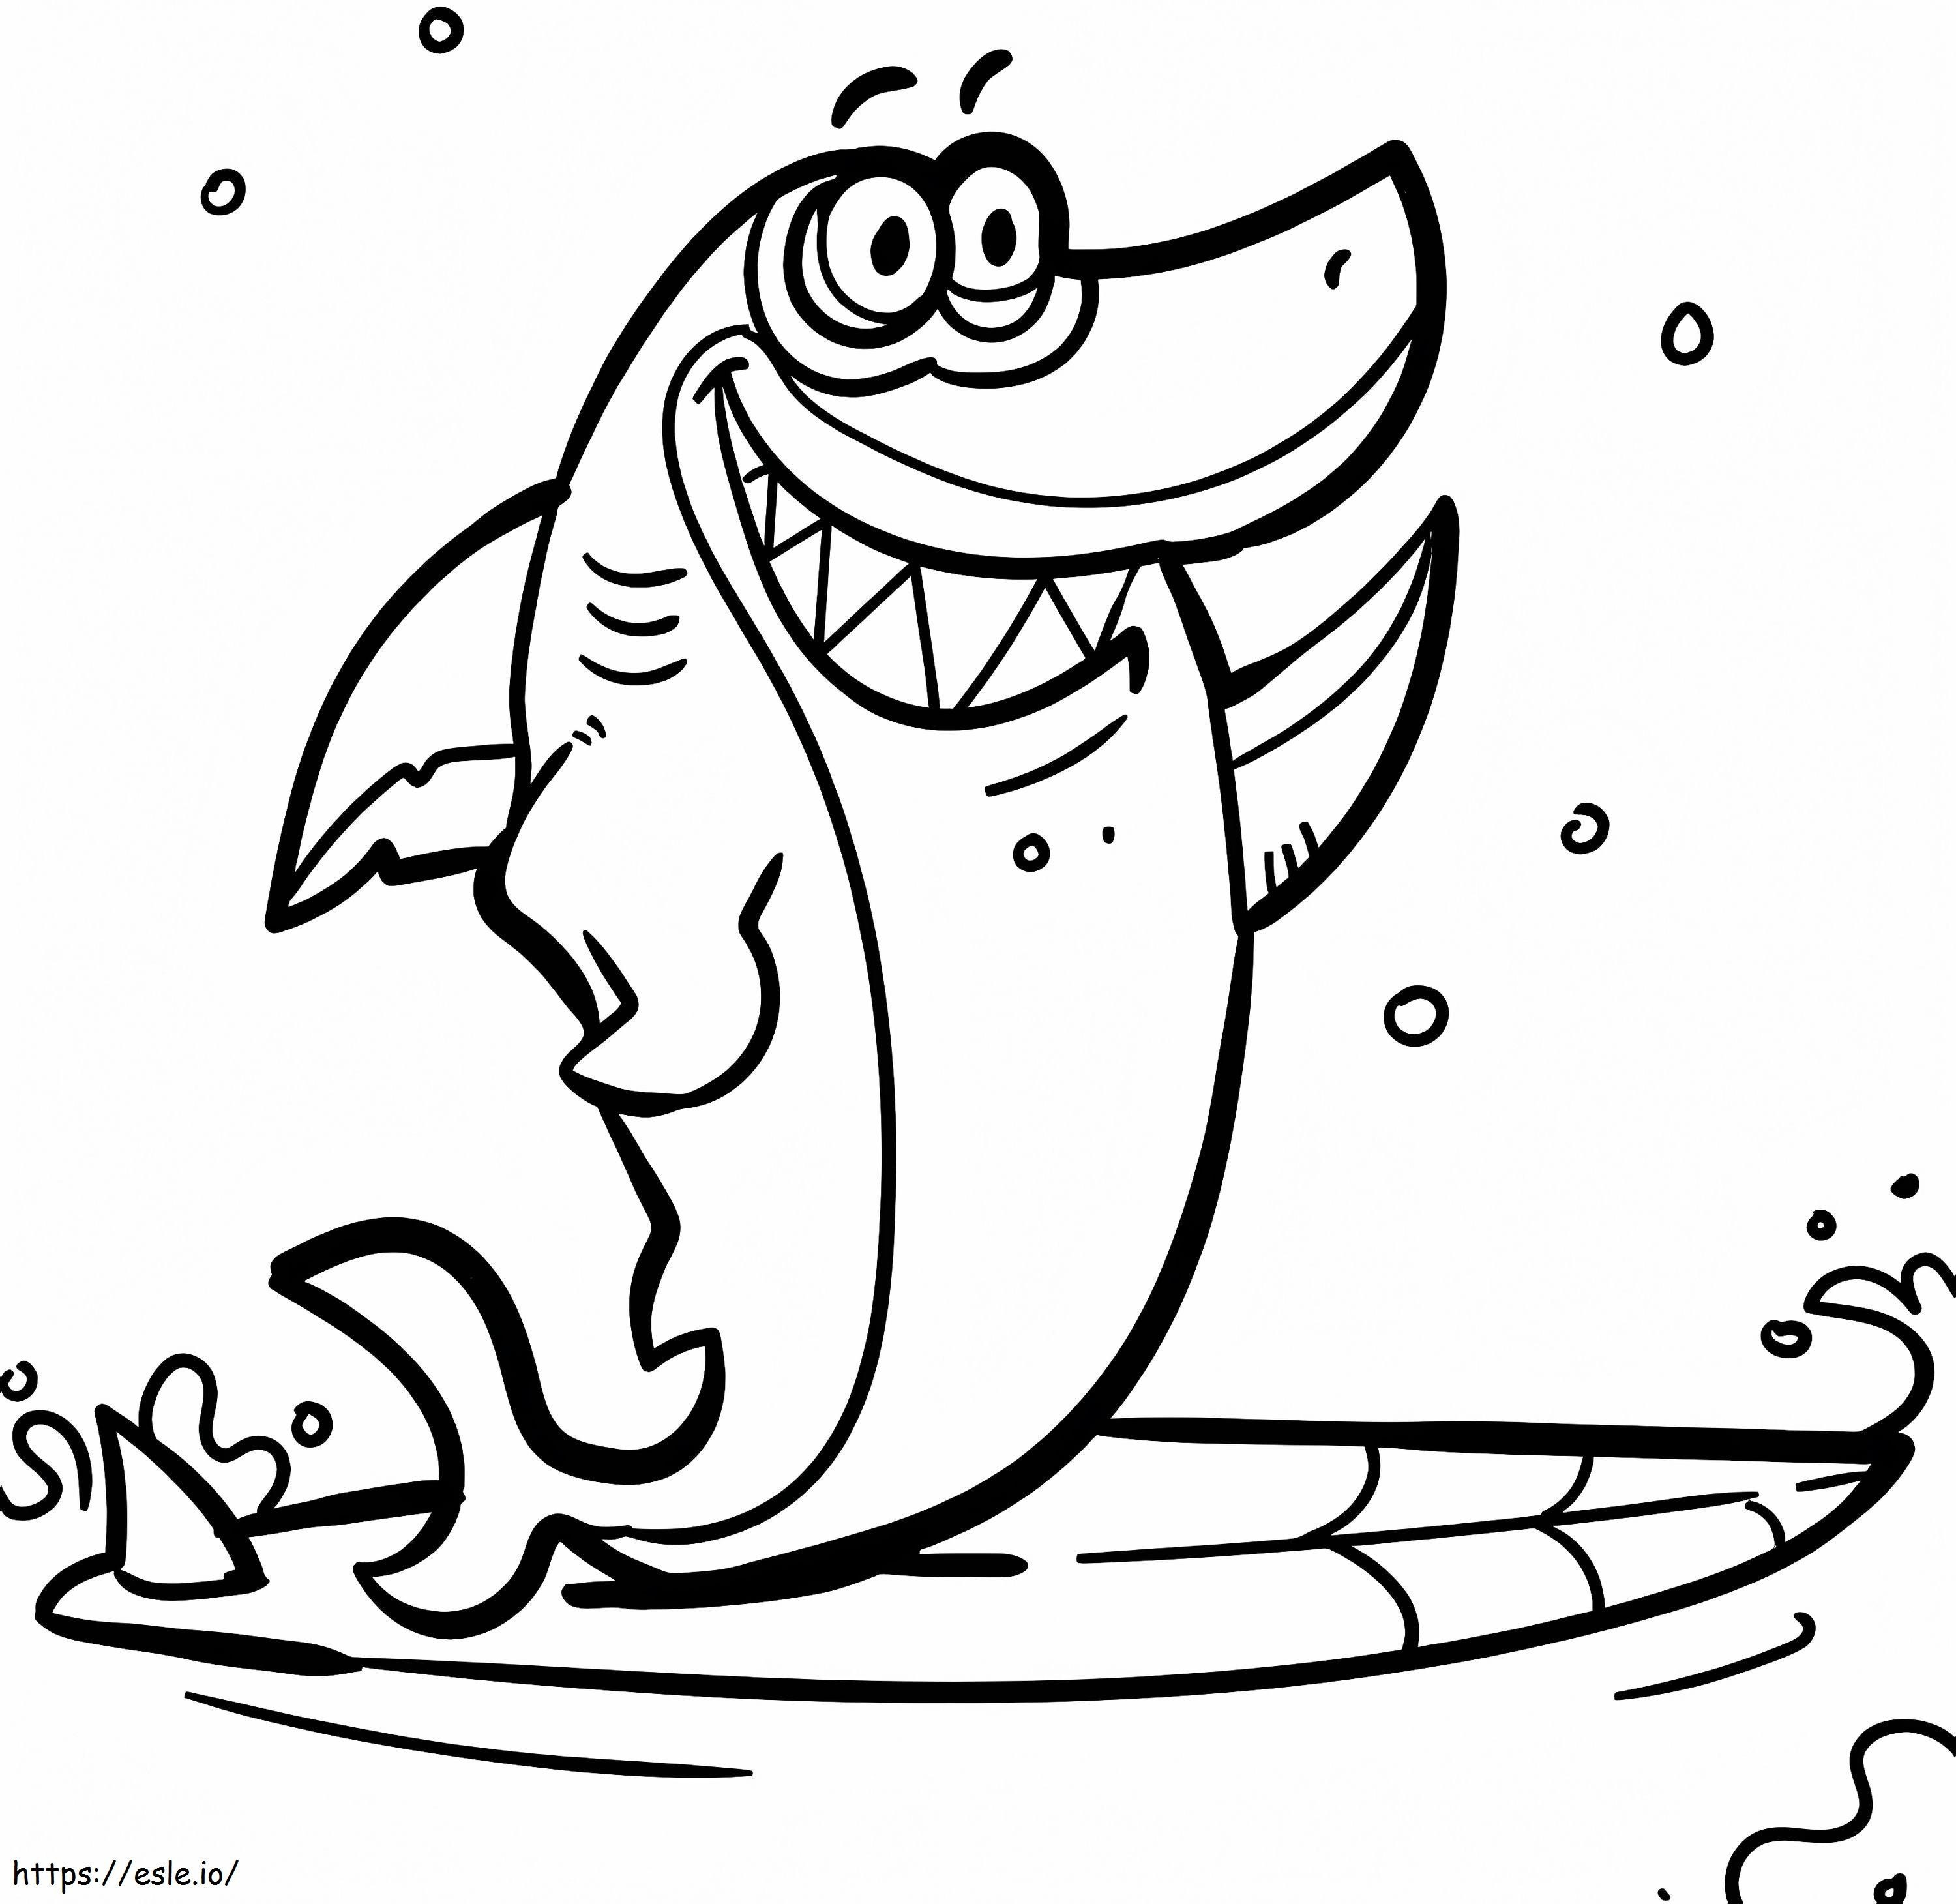 Shark On Surfboard coloring page